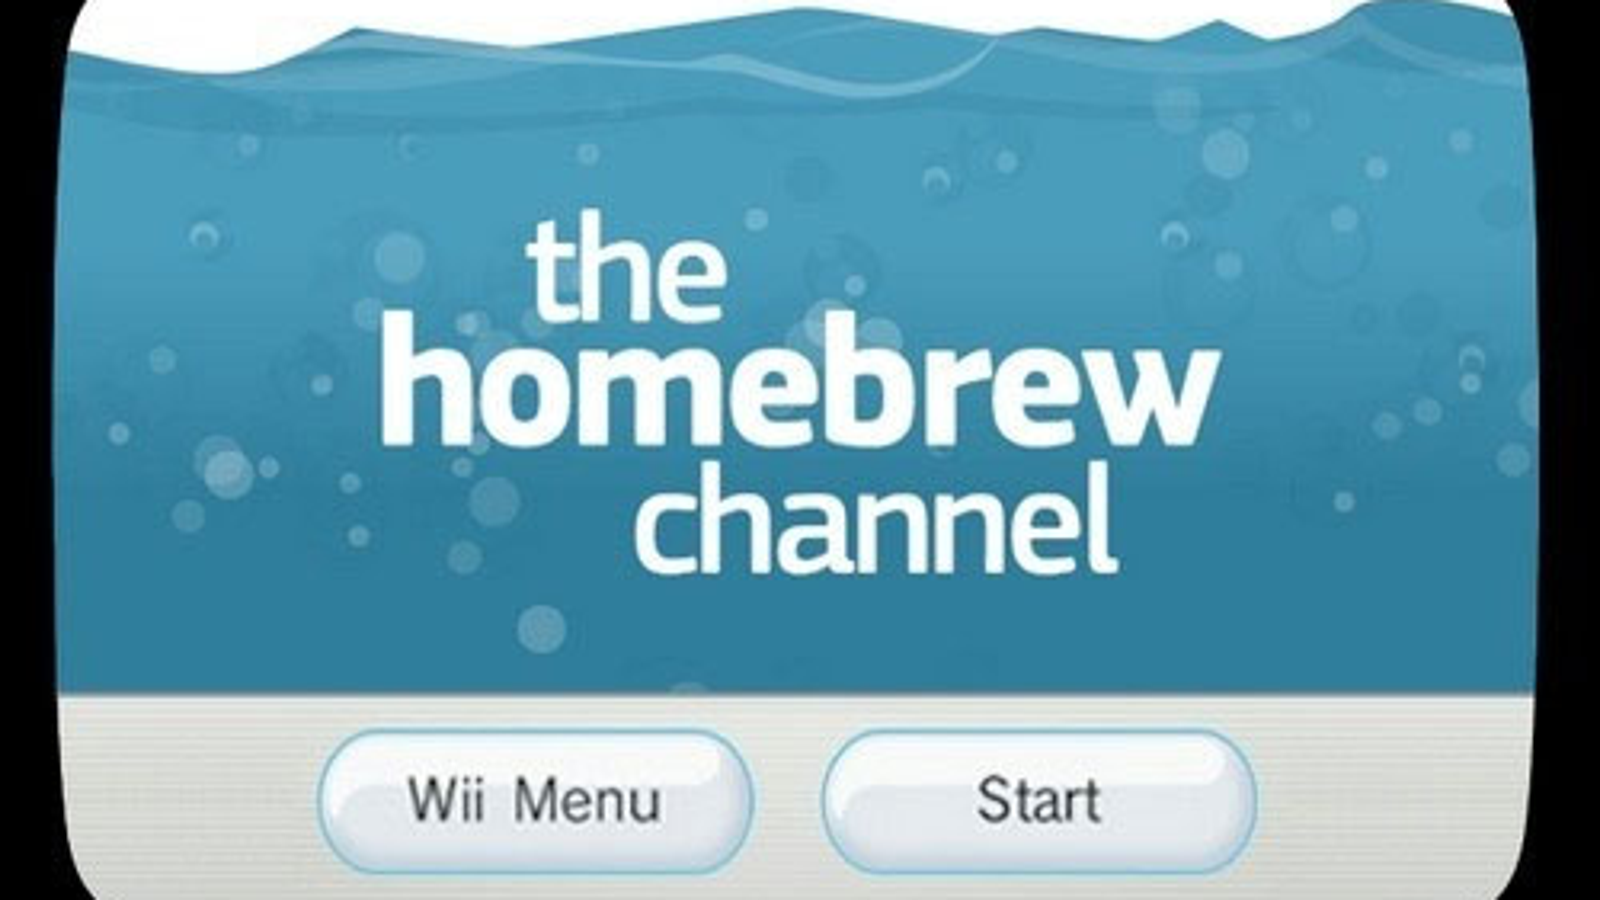 homebrew channel wii apps list